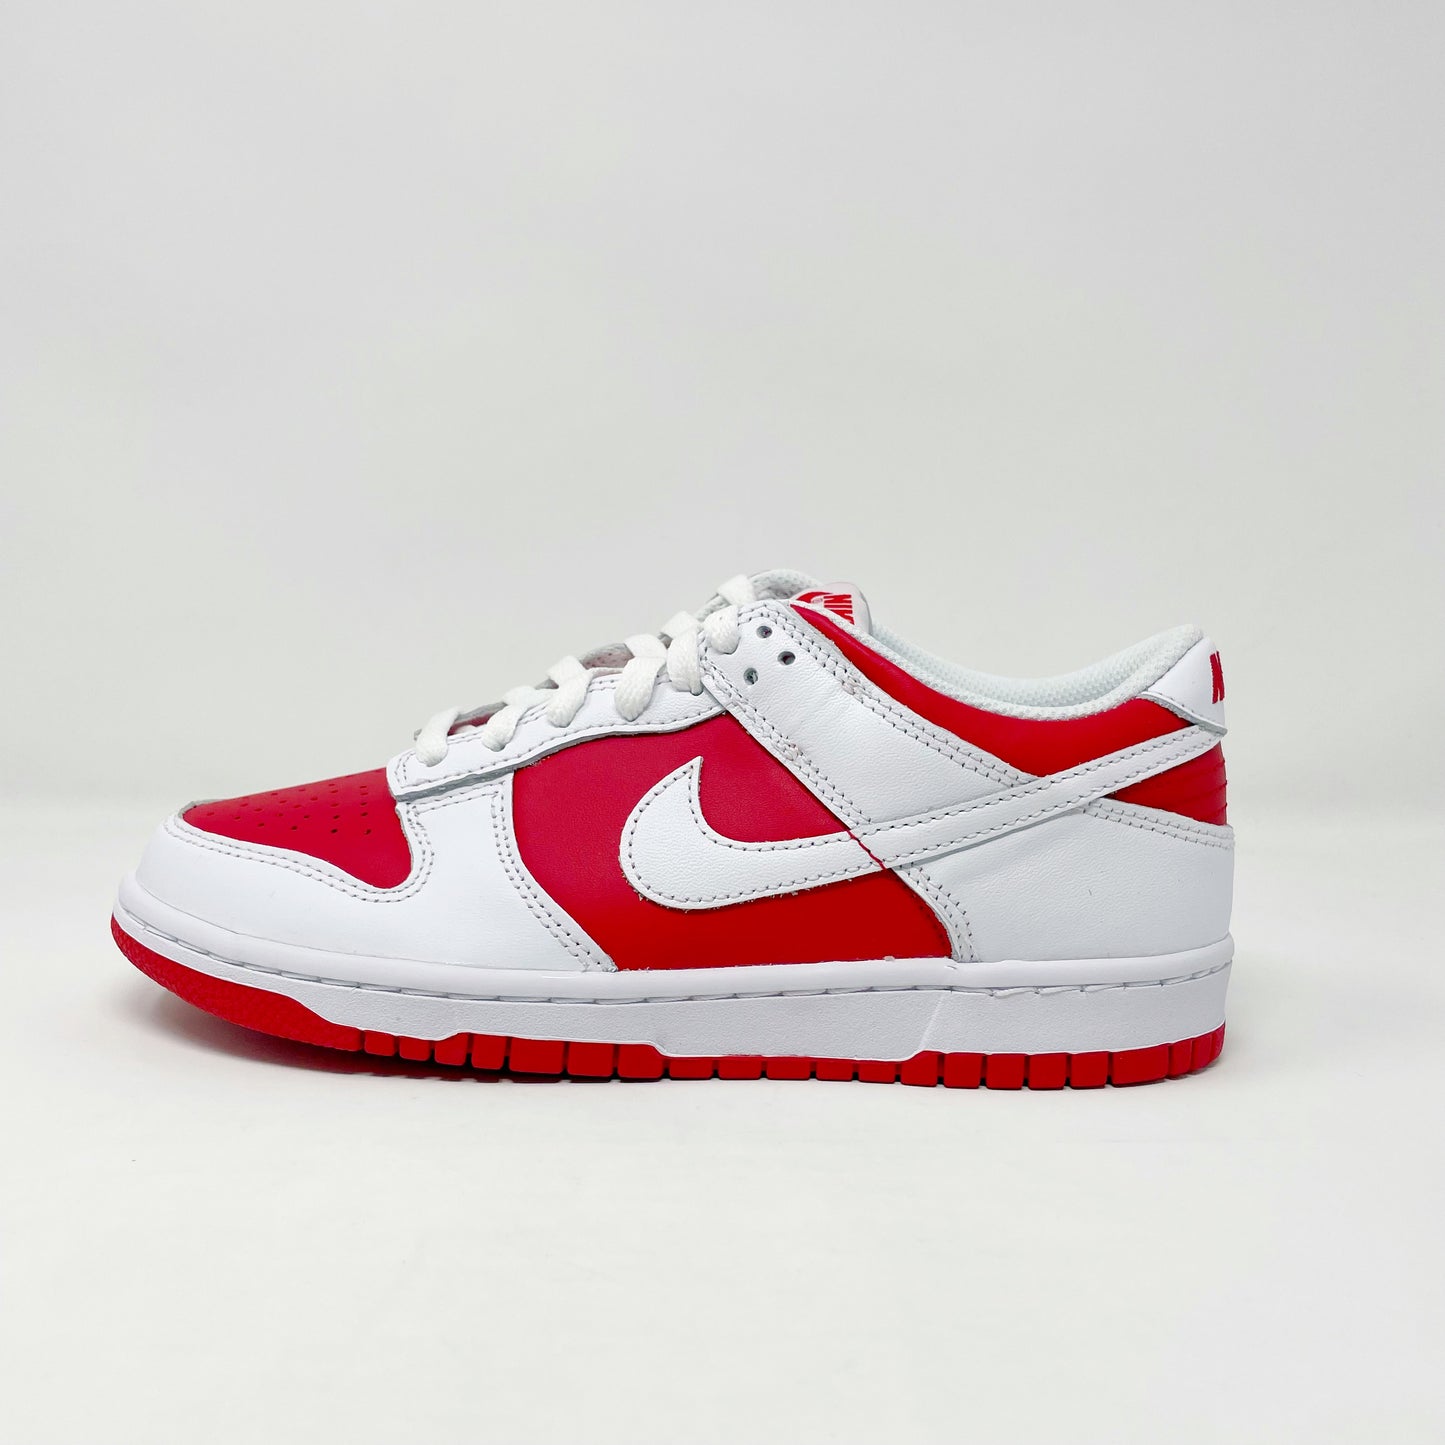 Nike Dunk Low “Championship Red” (GS)